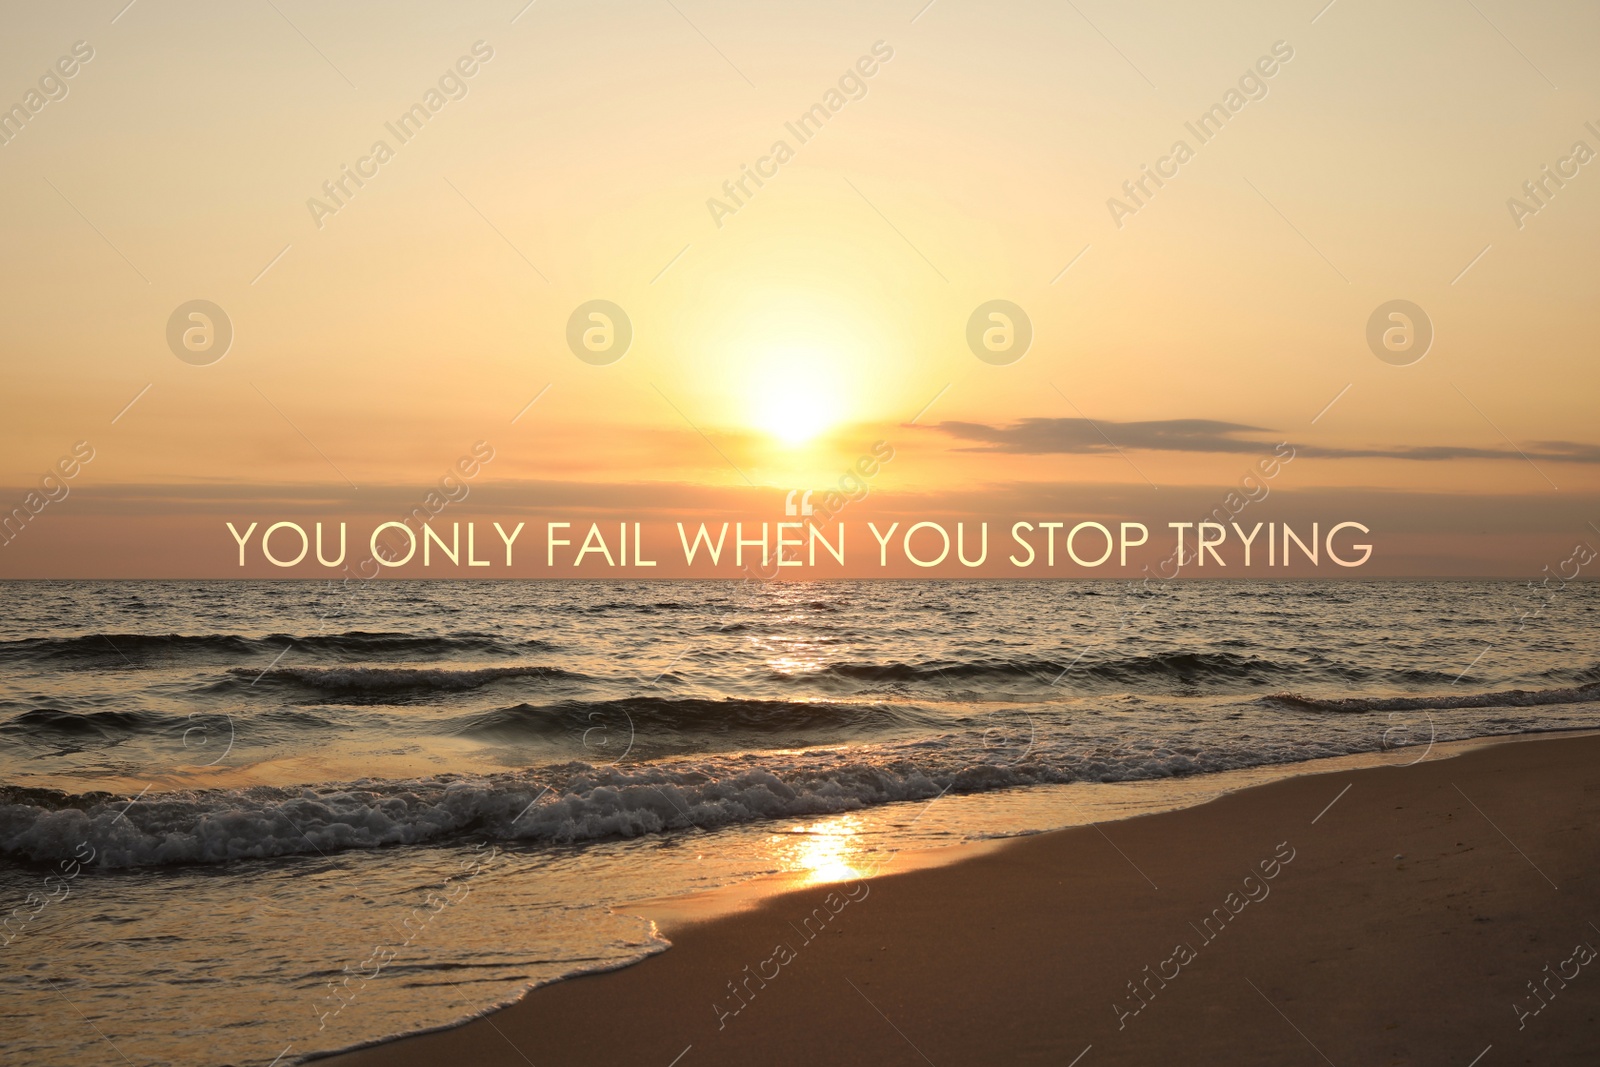 Image of You Only Fail When You Stop Trying. Inspirational quote motivating not to despair and keep on moving forward. Text against beautiful seascape during sunrise